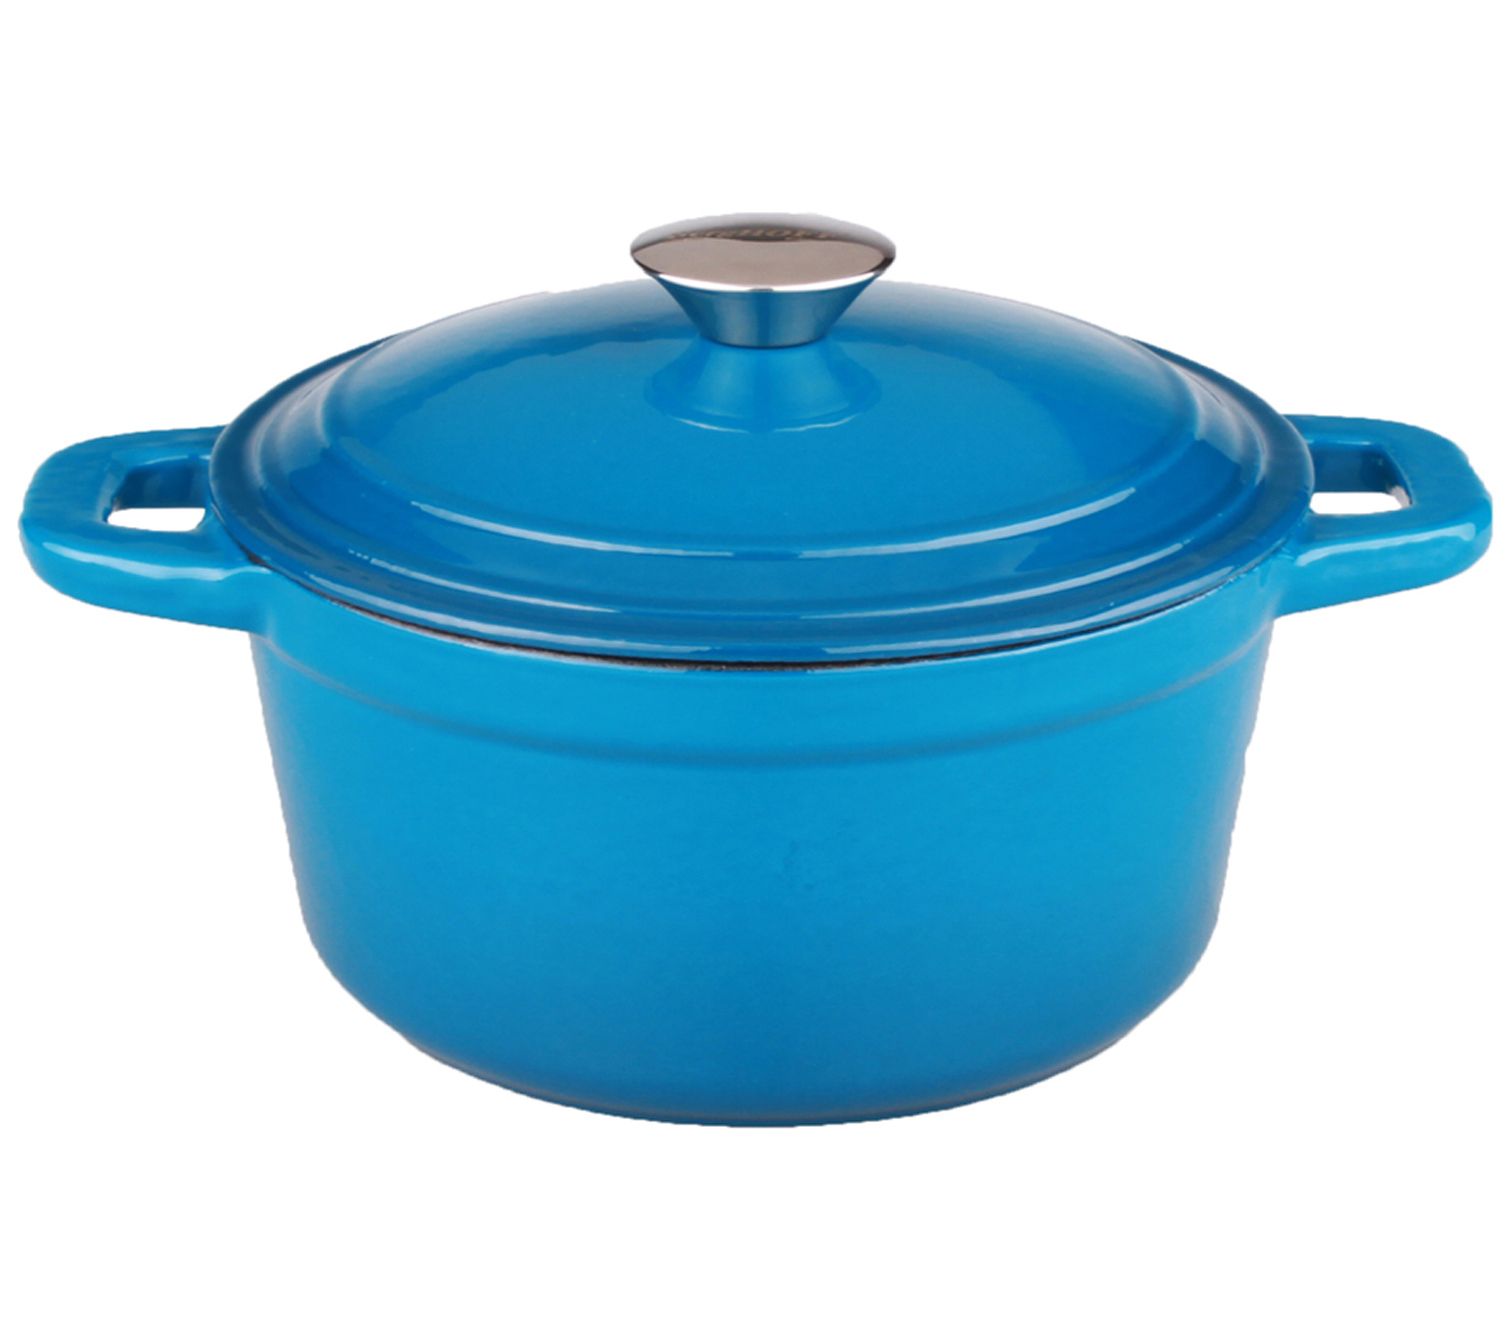 Taste of Home 7-Qt Enameled Cast Iron Dutch Oven w/ Grill Lid 